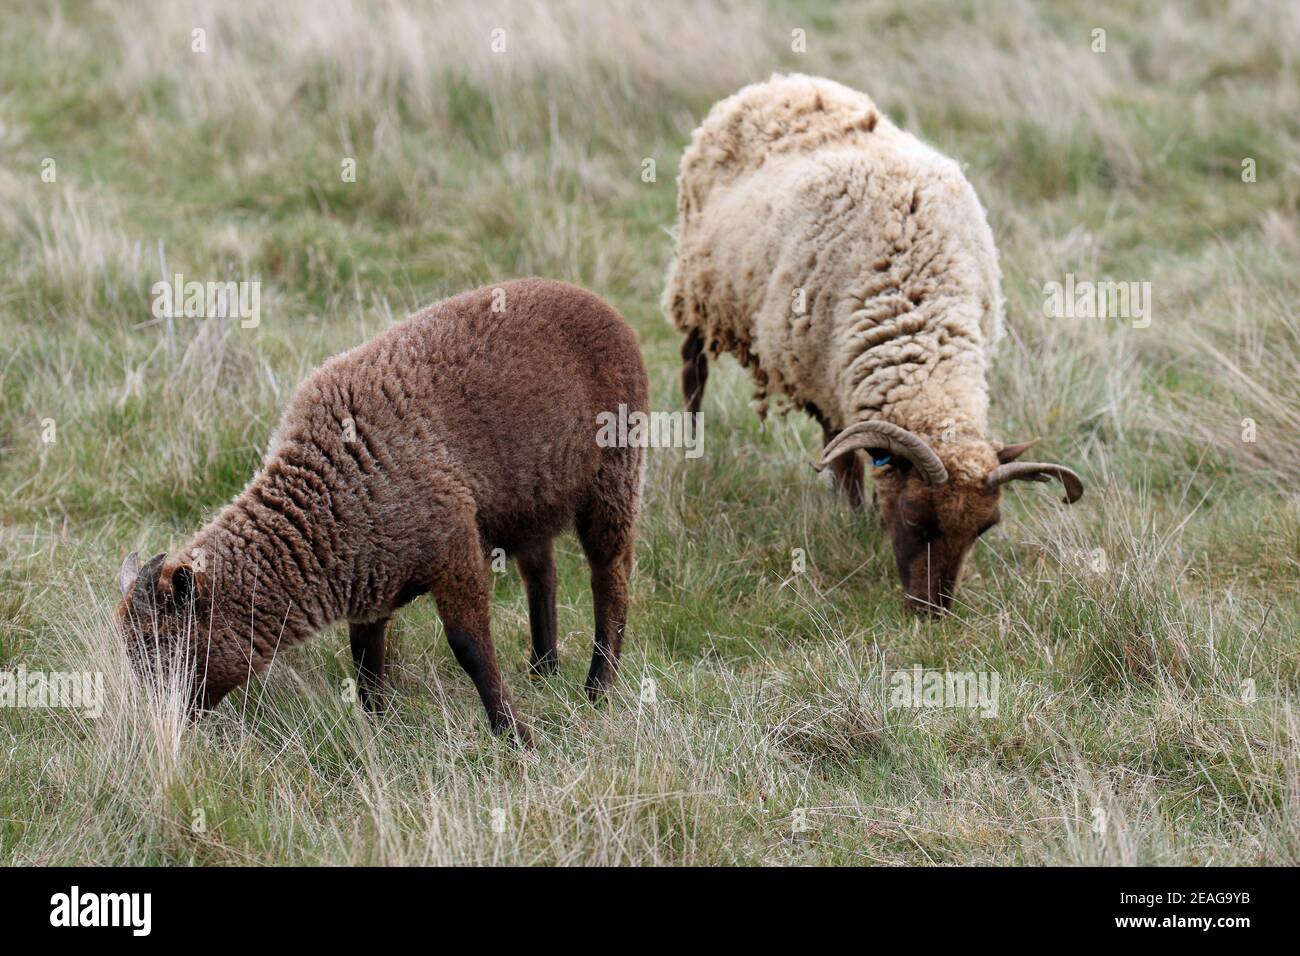 Manx Loaghtan ewe rare breed sheep with dark brown head, legs, lighter brown coat, curled horns with a dark brown lamb grazing on a rough grass field. Stock Photo